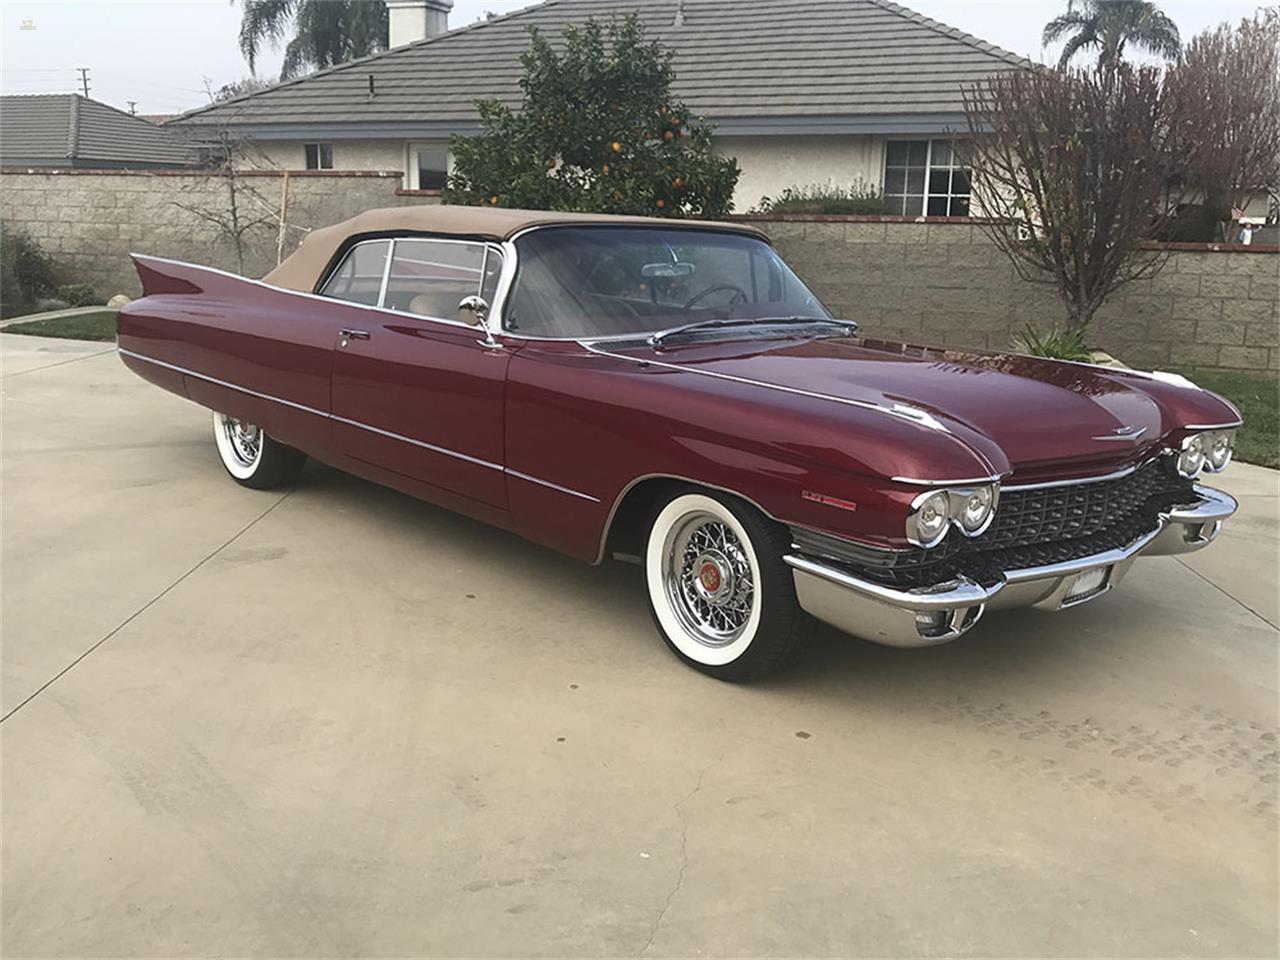 1960 Cadillac Series 62 in West Hollywood, California